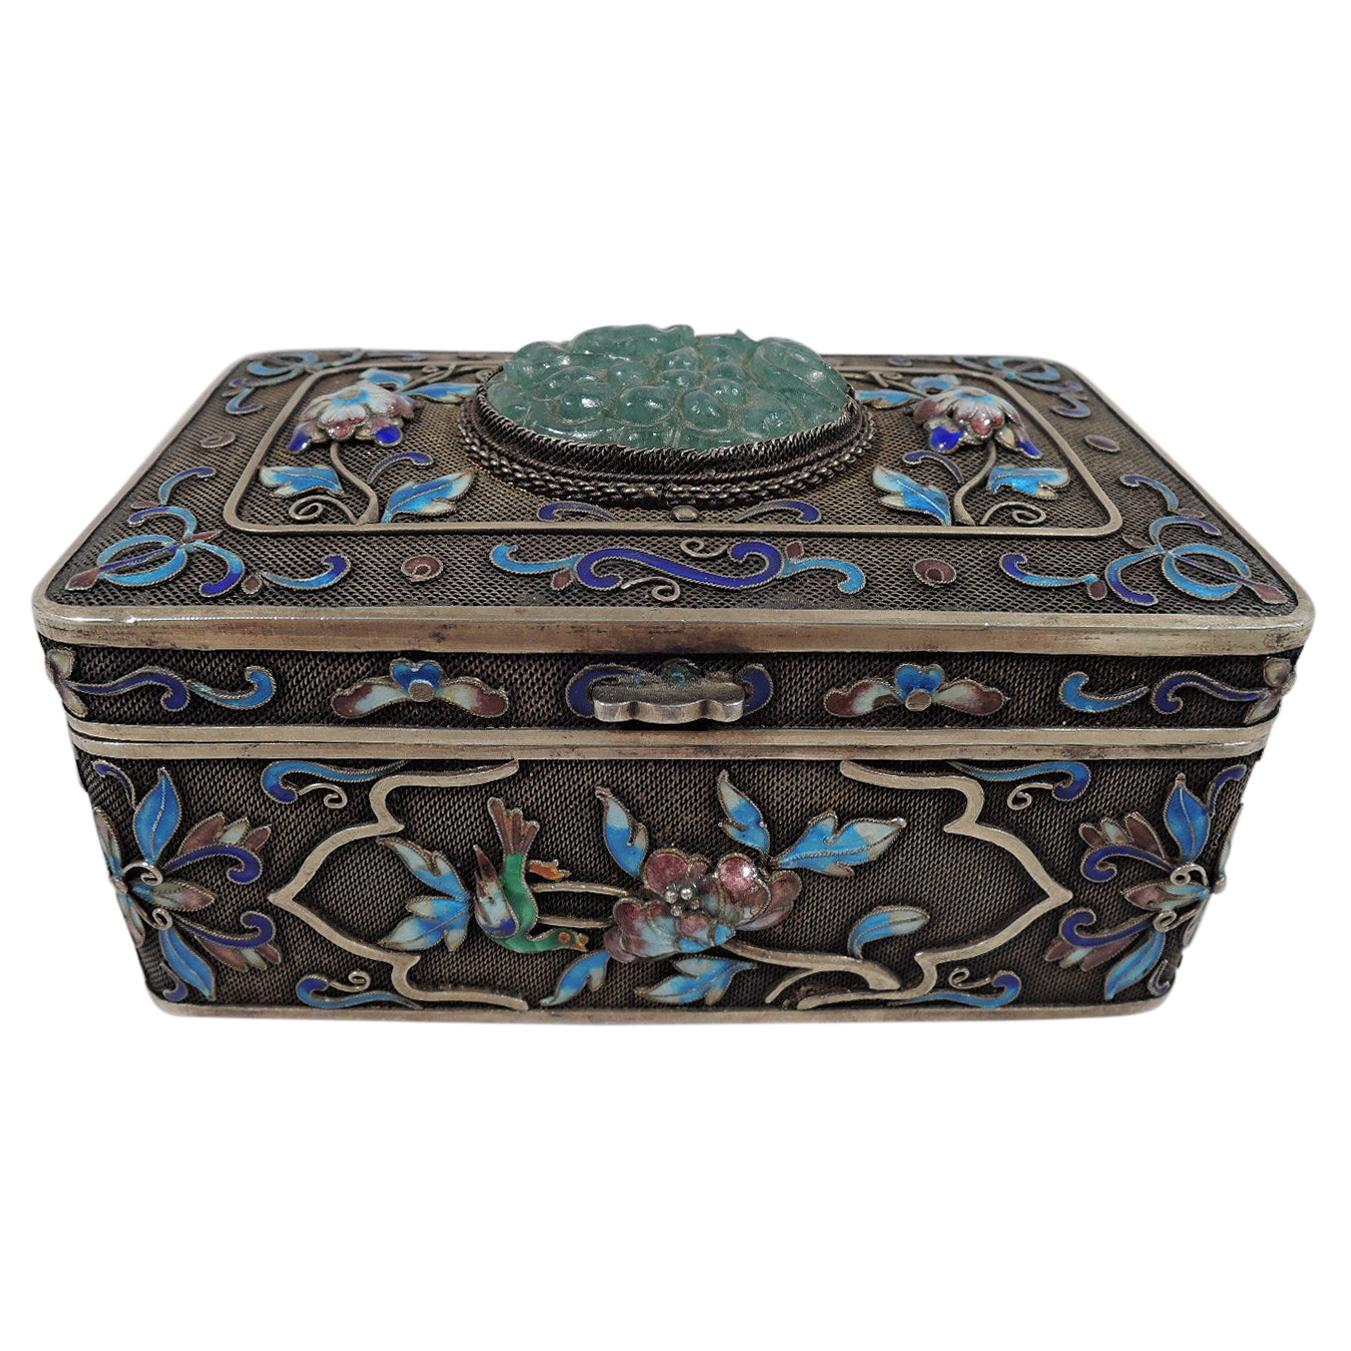 Antique Chinese Silver Gilt Filigree Box with Enamel and Carved Jade